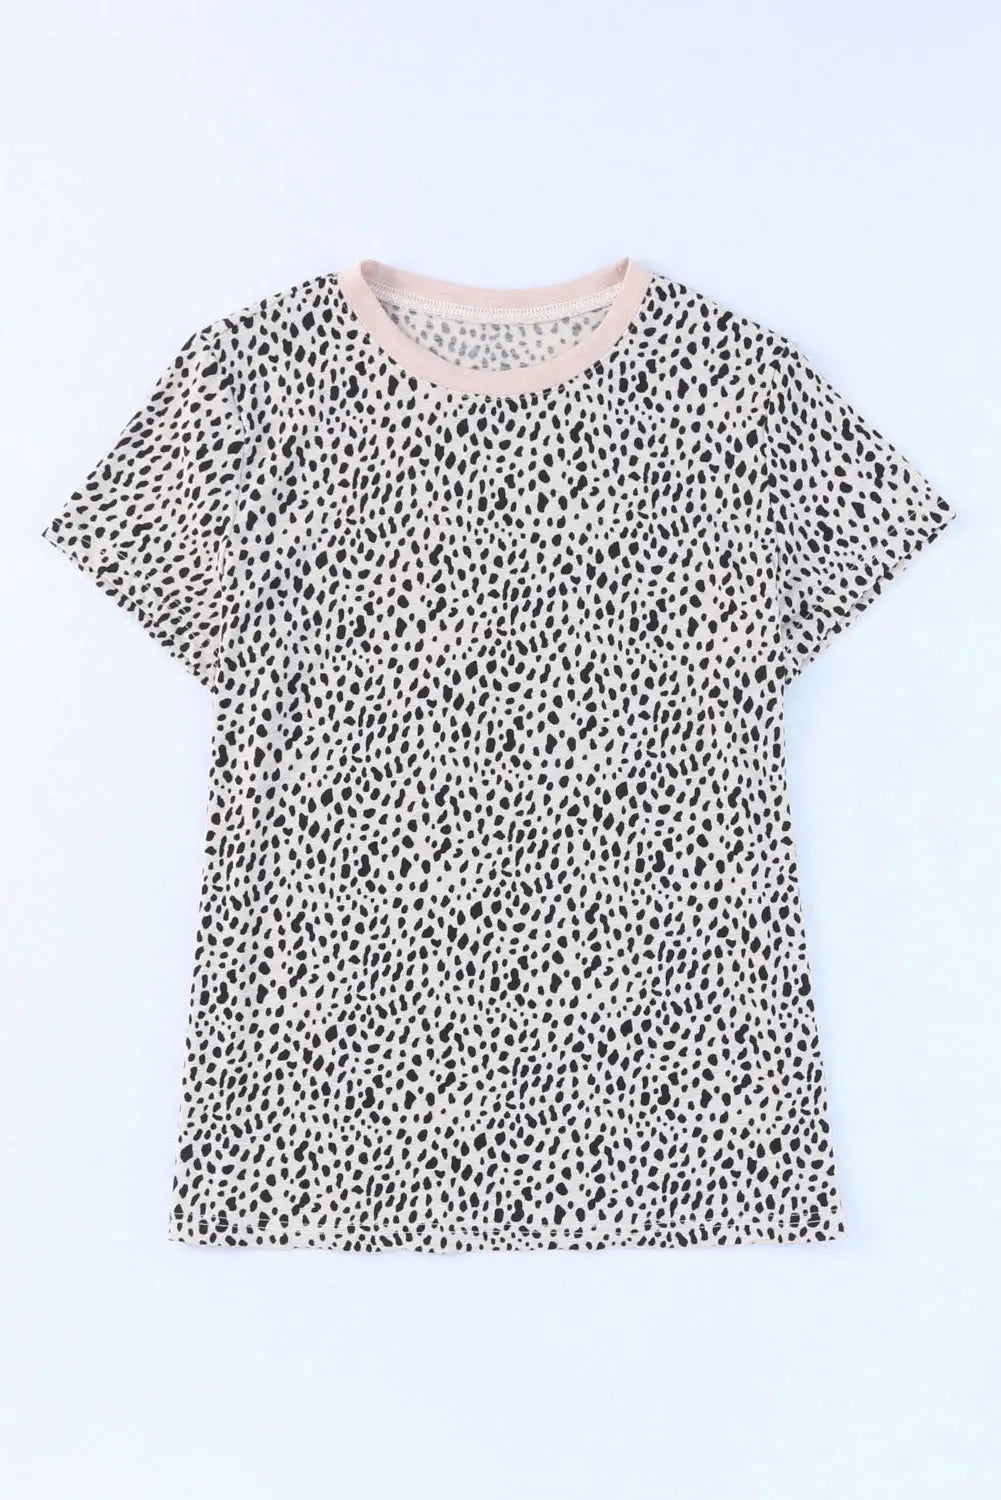 Animal Spotted Print Round Neck Long Sleeve Top-100